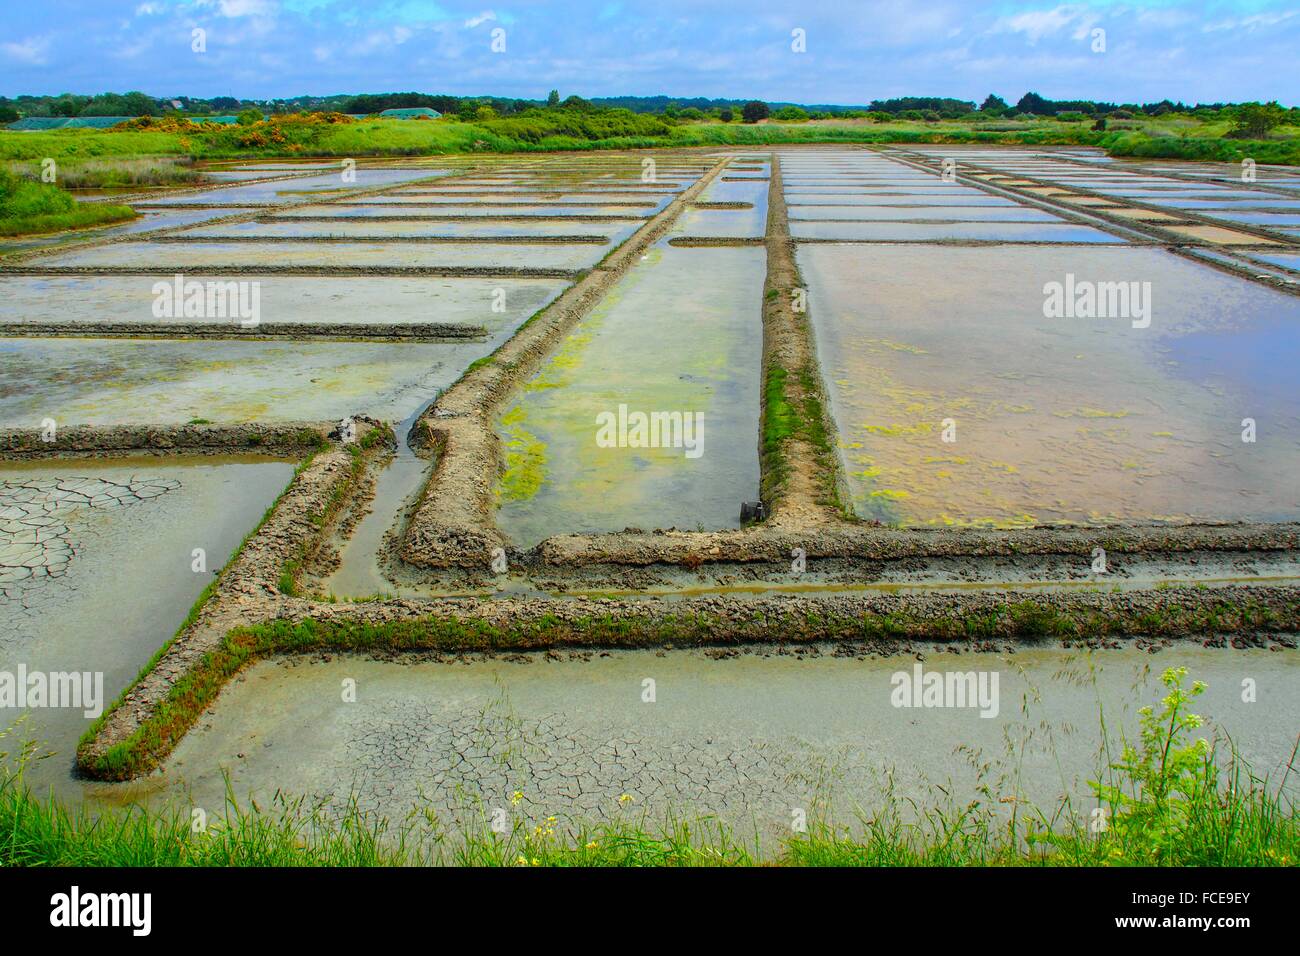 France-Loire Atlantique- Guerande.the 'Pays Blanc' (White Land), because of its salt marshes Stock Photo